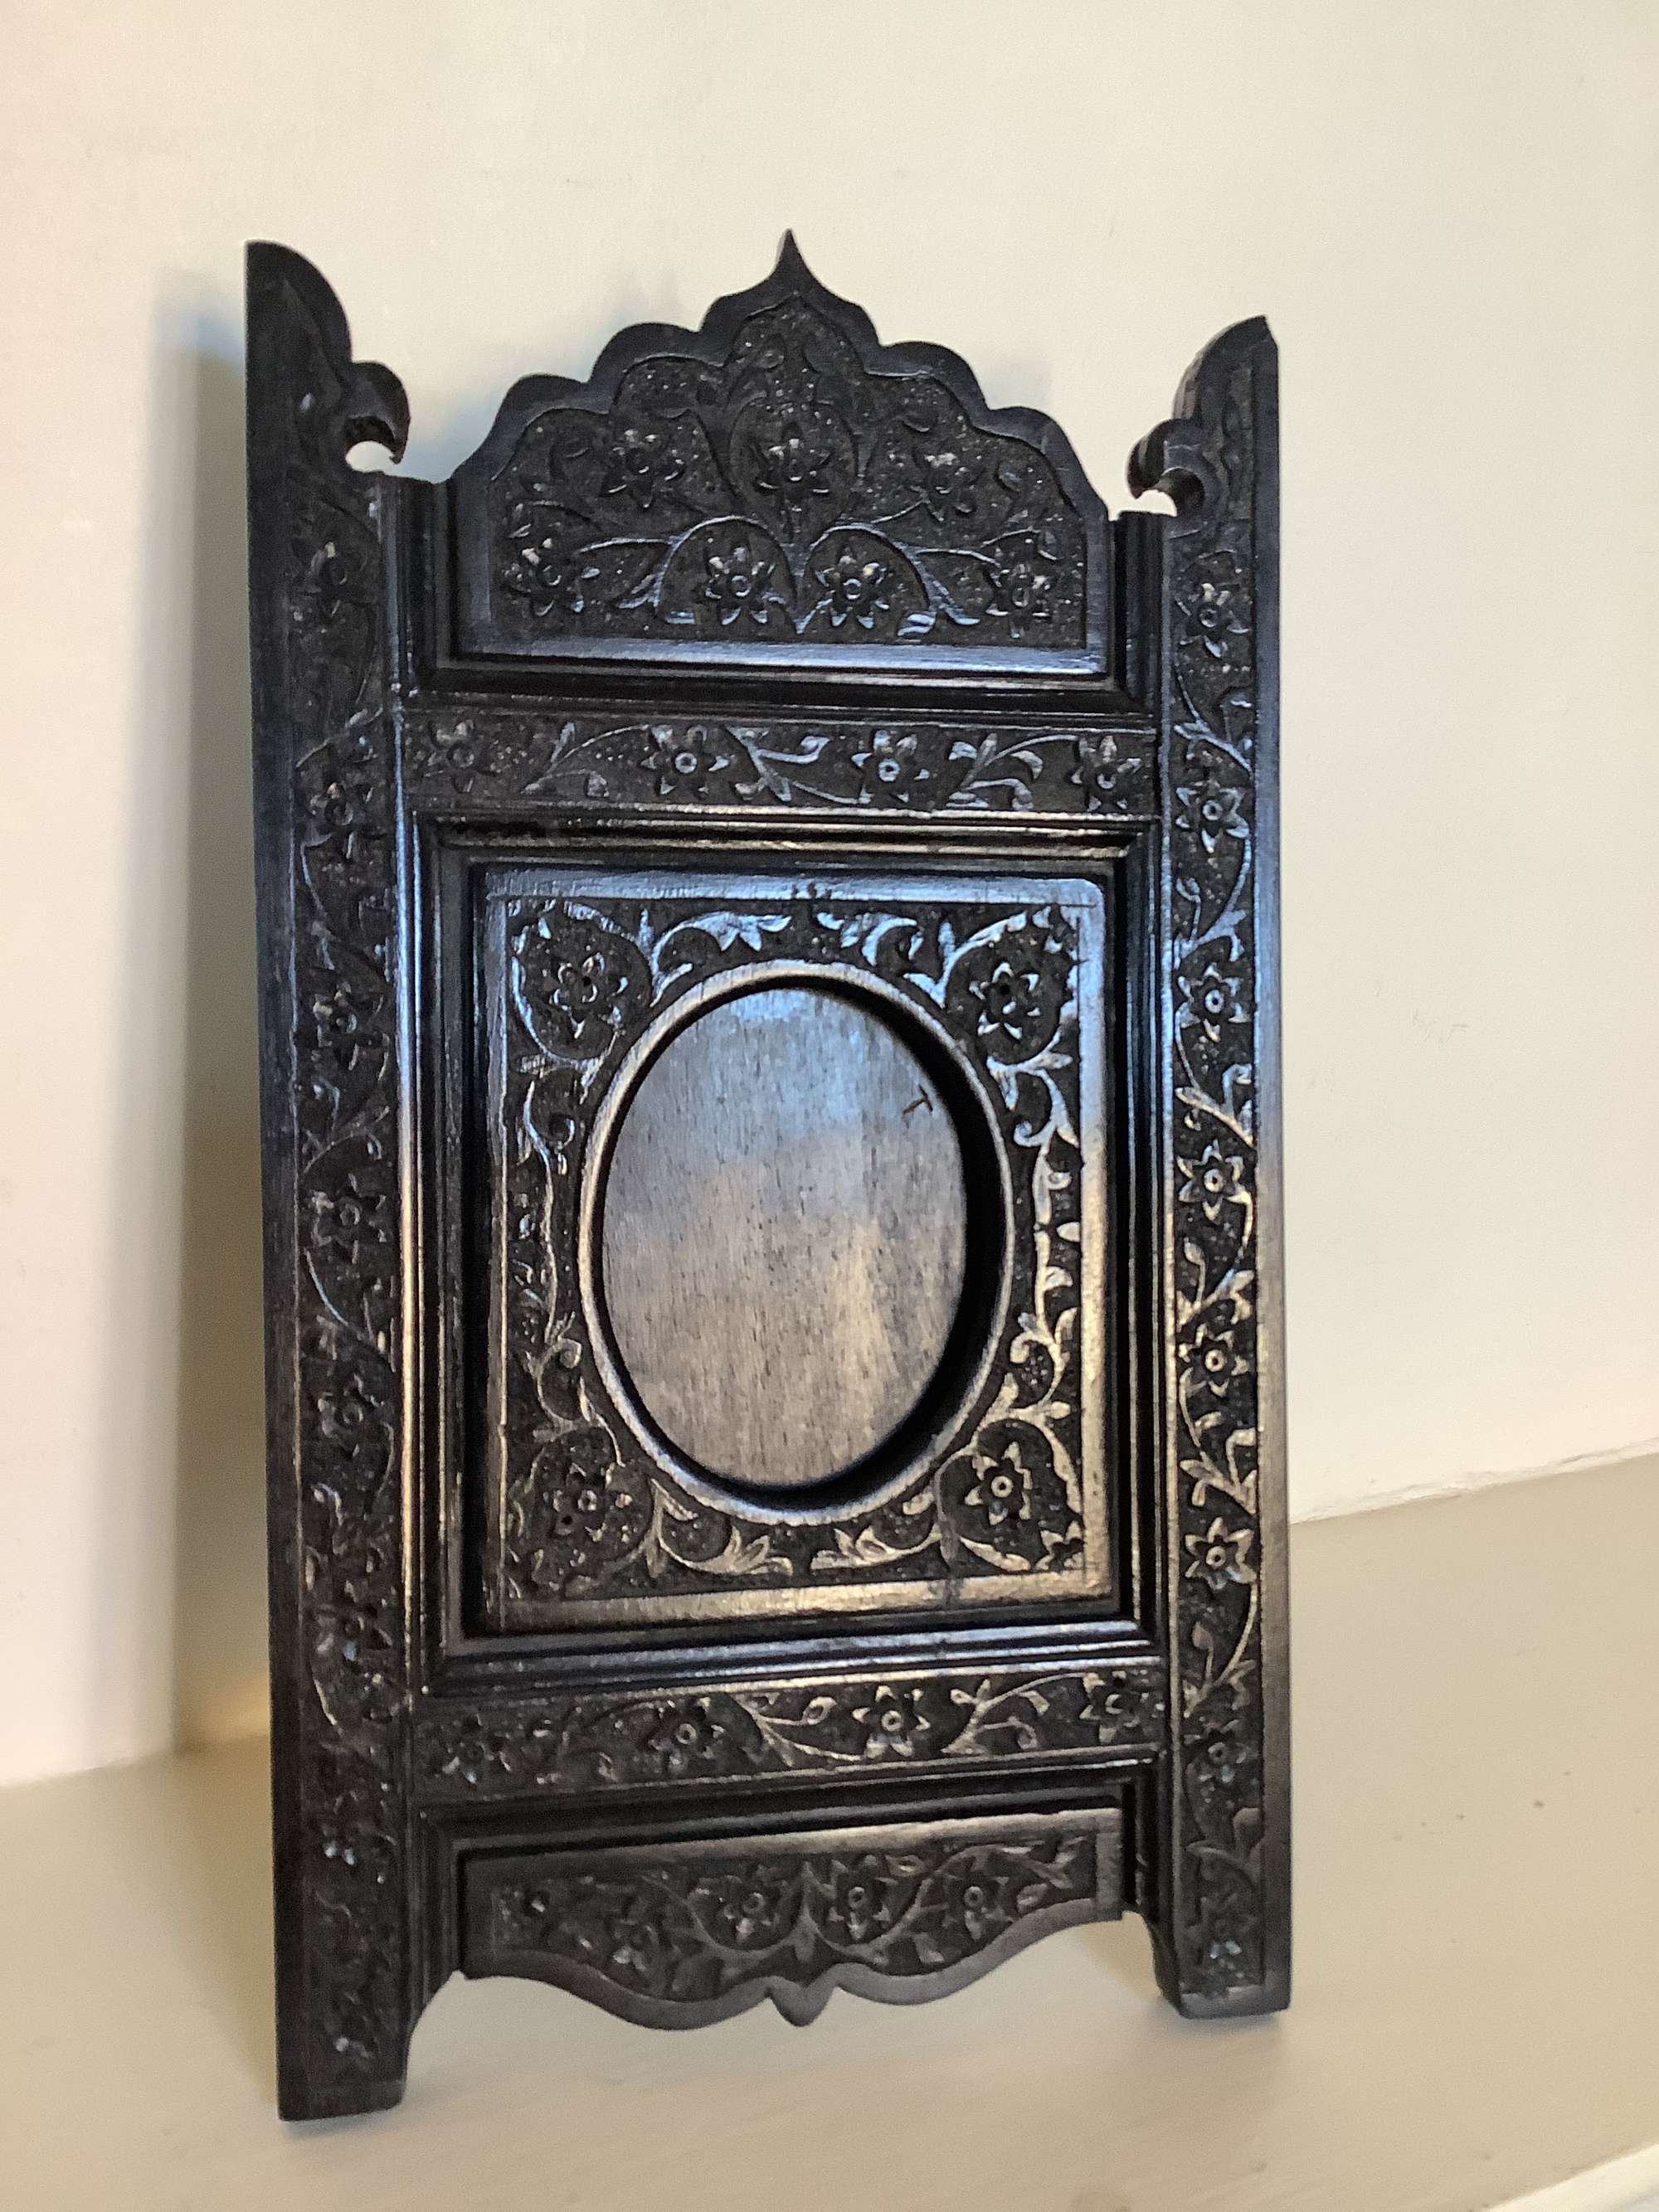 A very finely carved solid ebony Indian photo frame